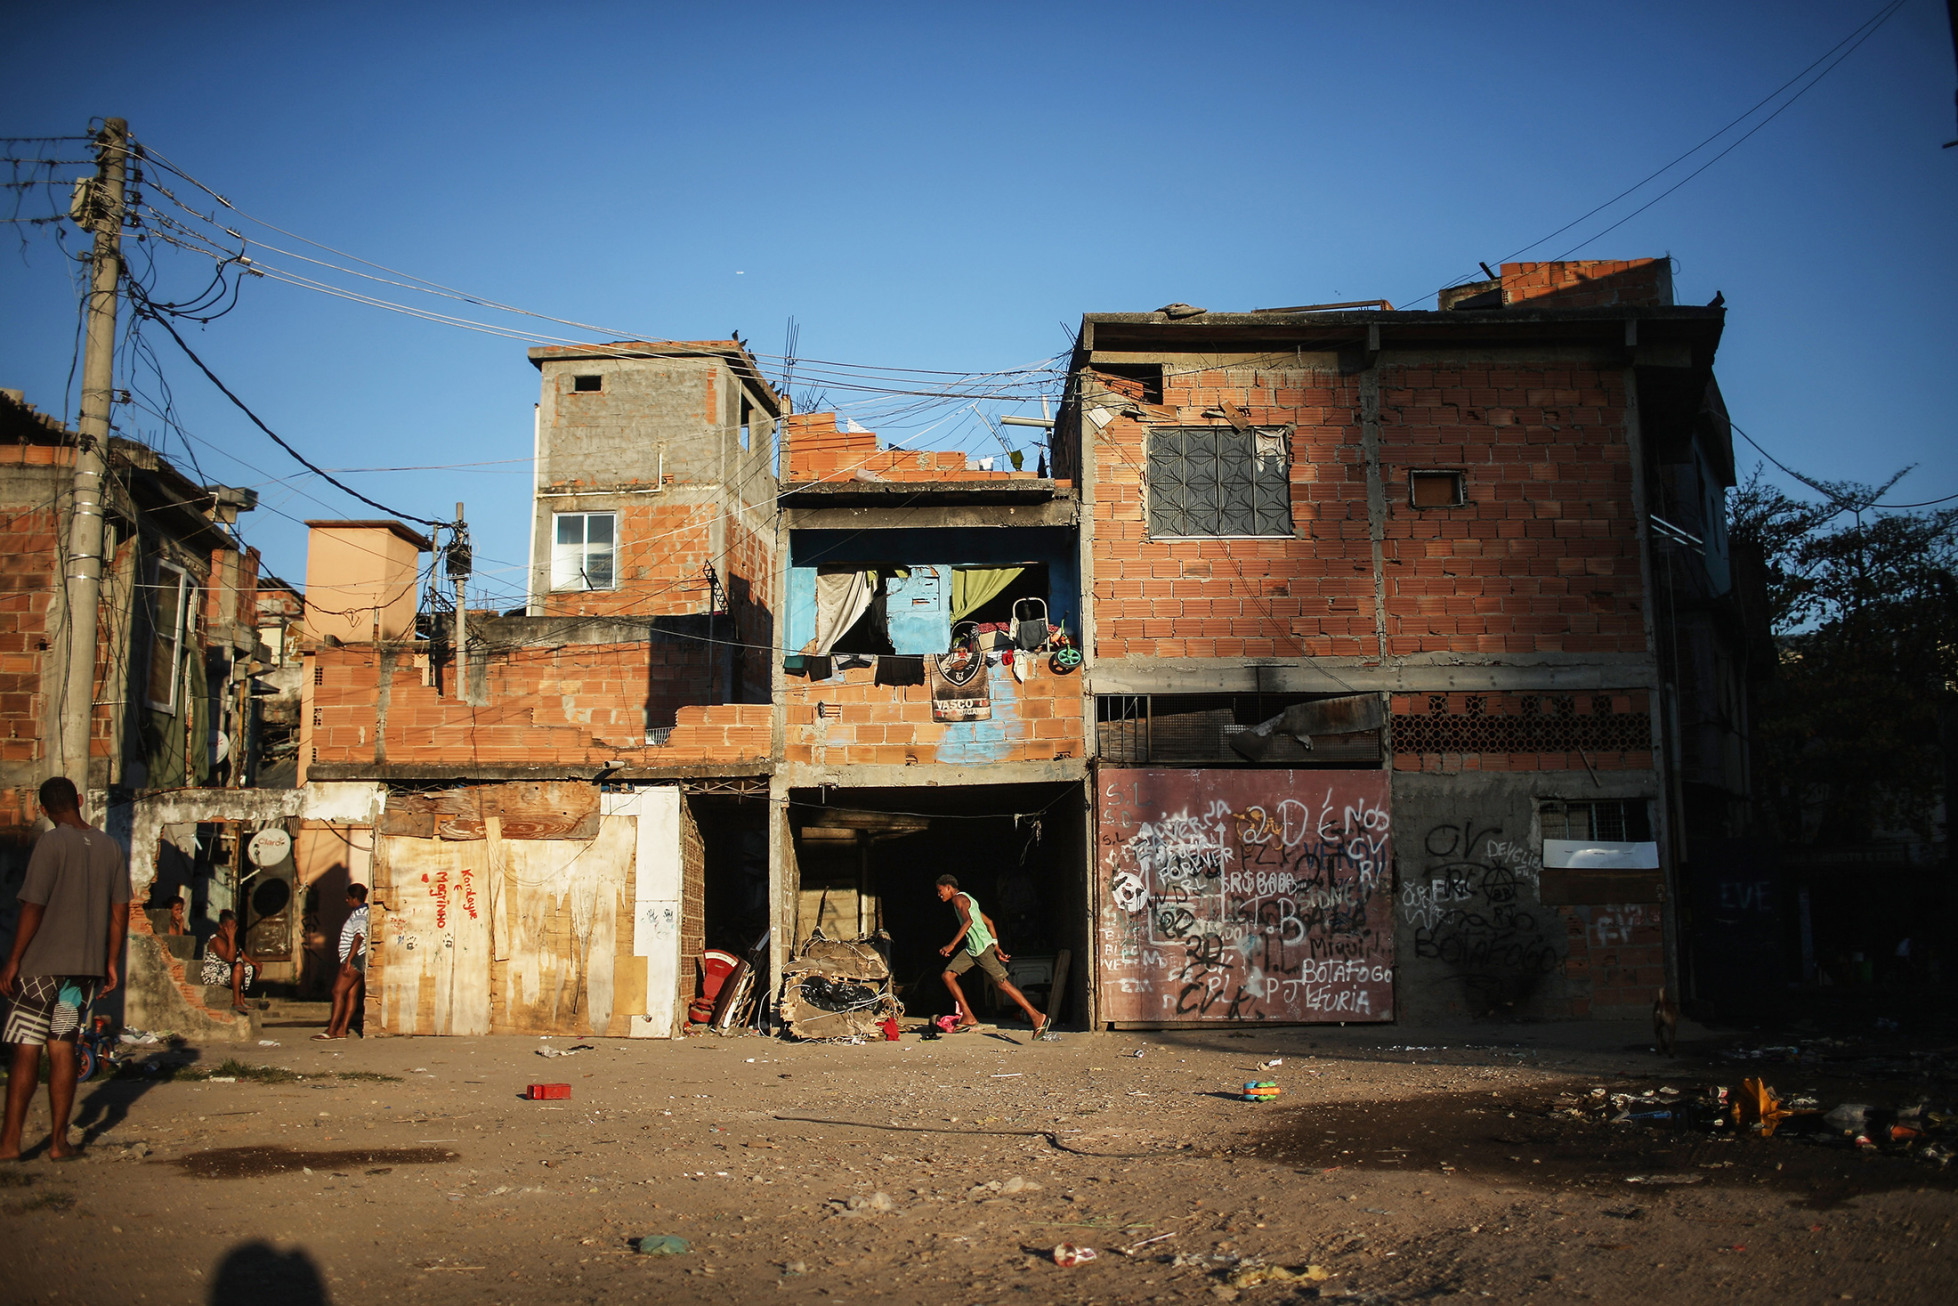 Homes in the Metro-Mangueira community, or 'favela', in Rio de Janeiro, Brazil, on July 24.
